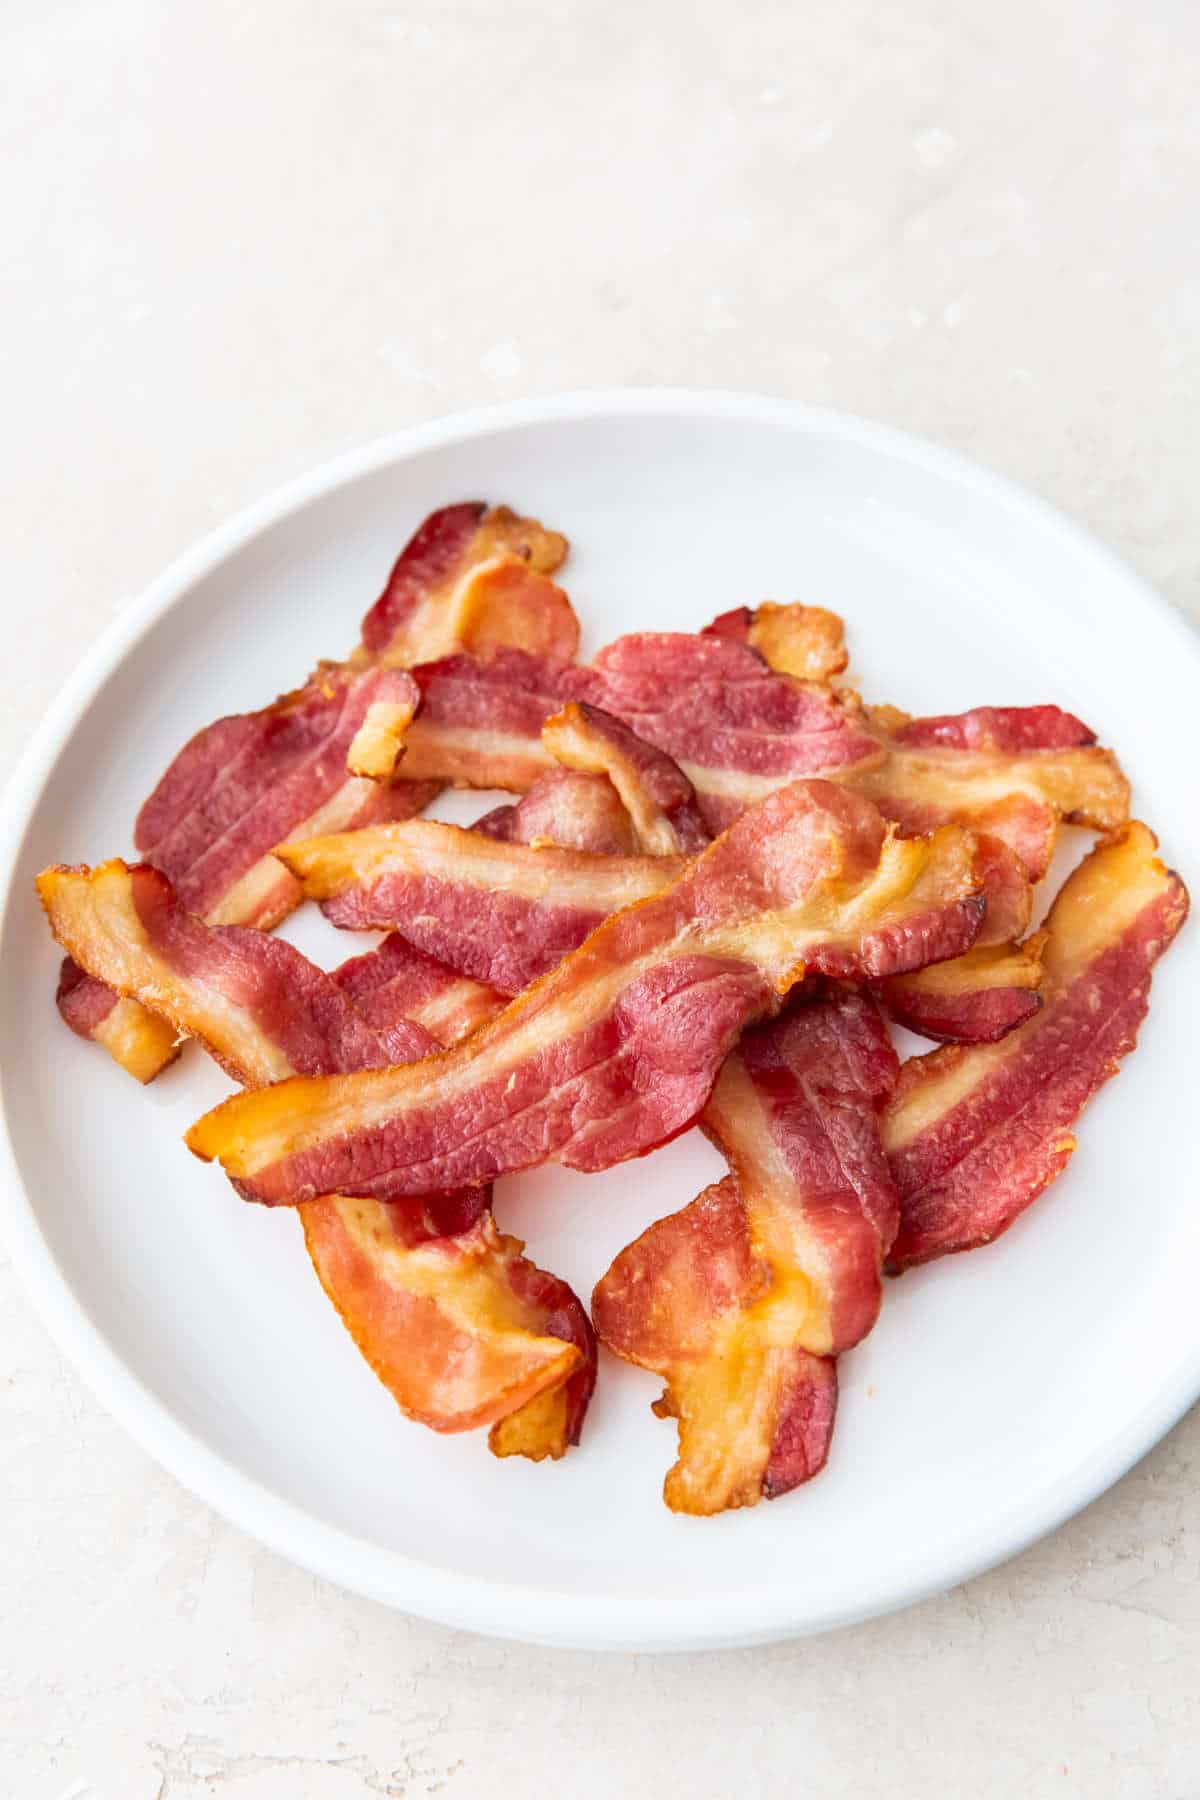 cooked crisp bacon cooling on a plate.